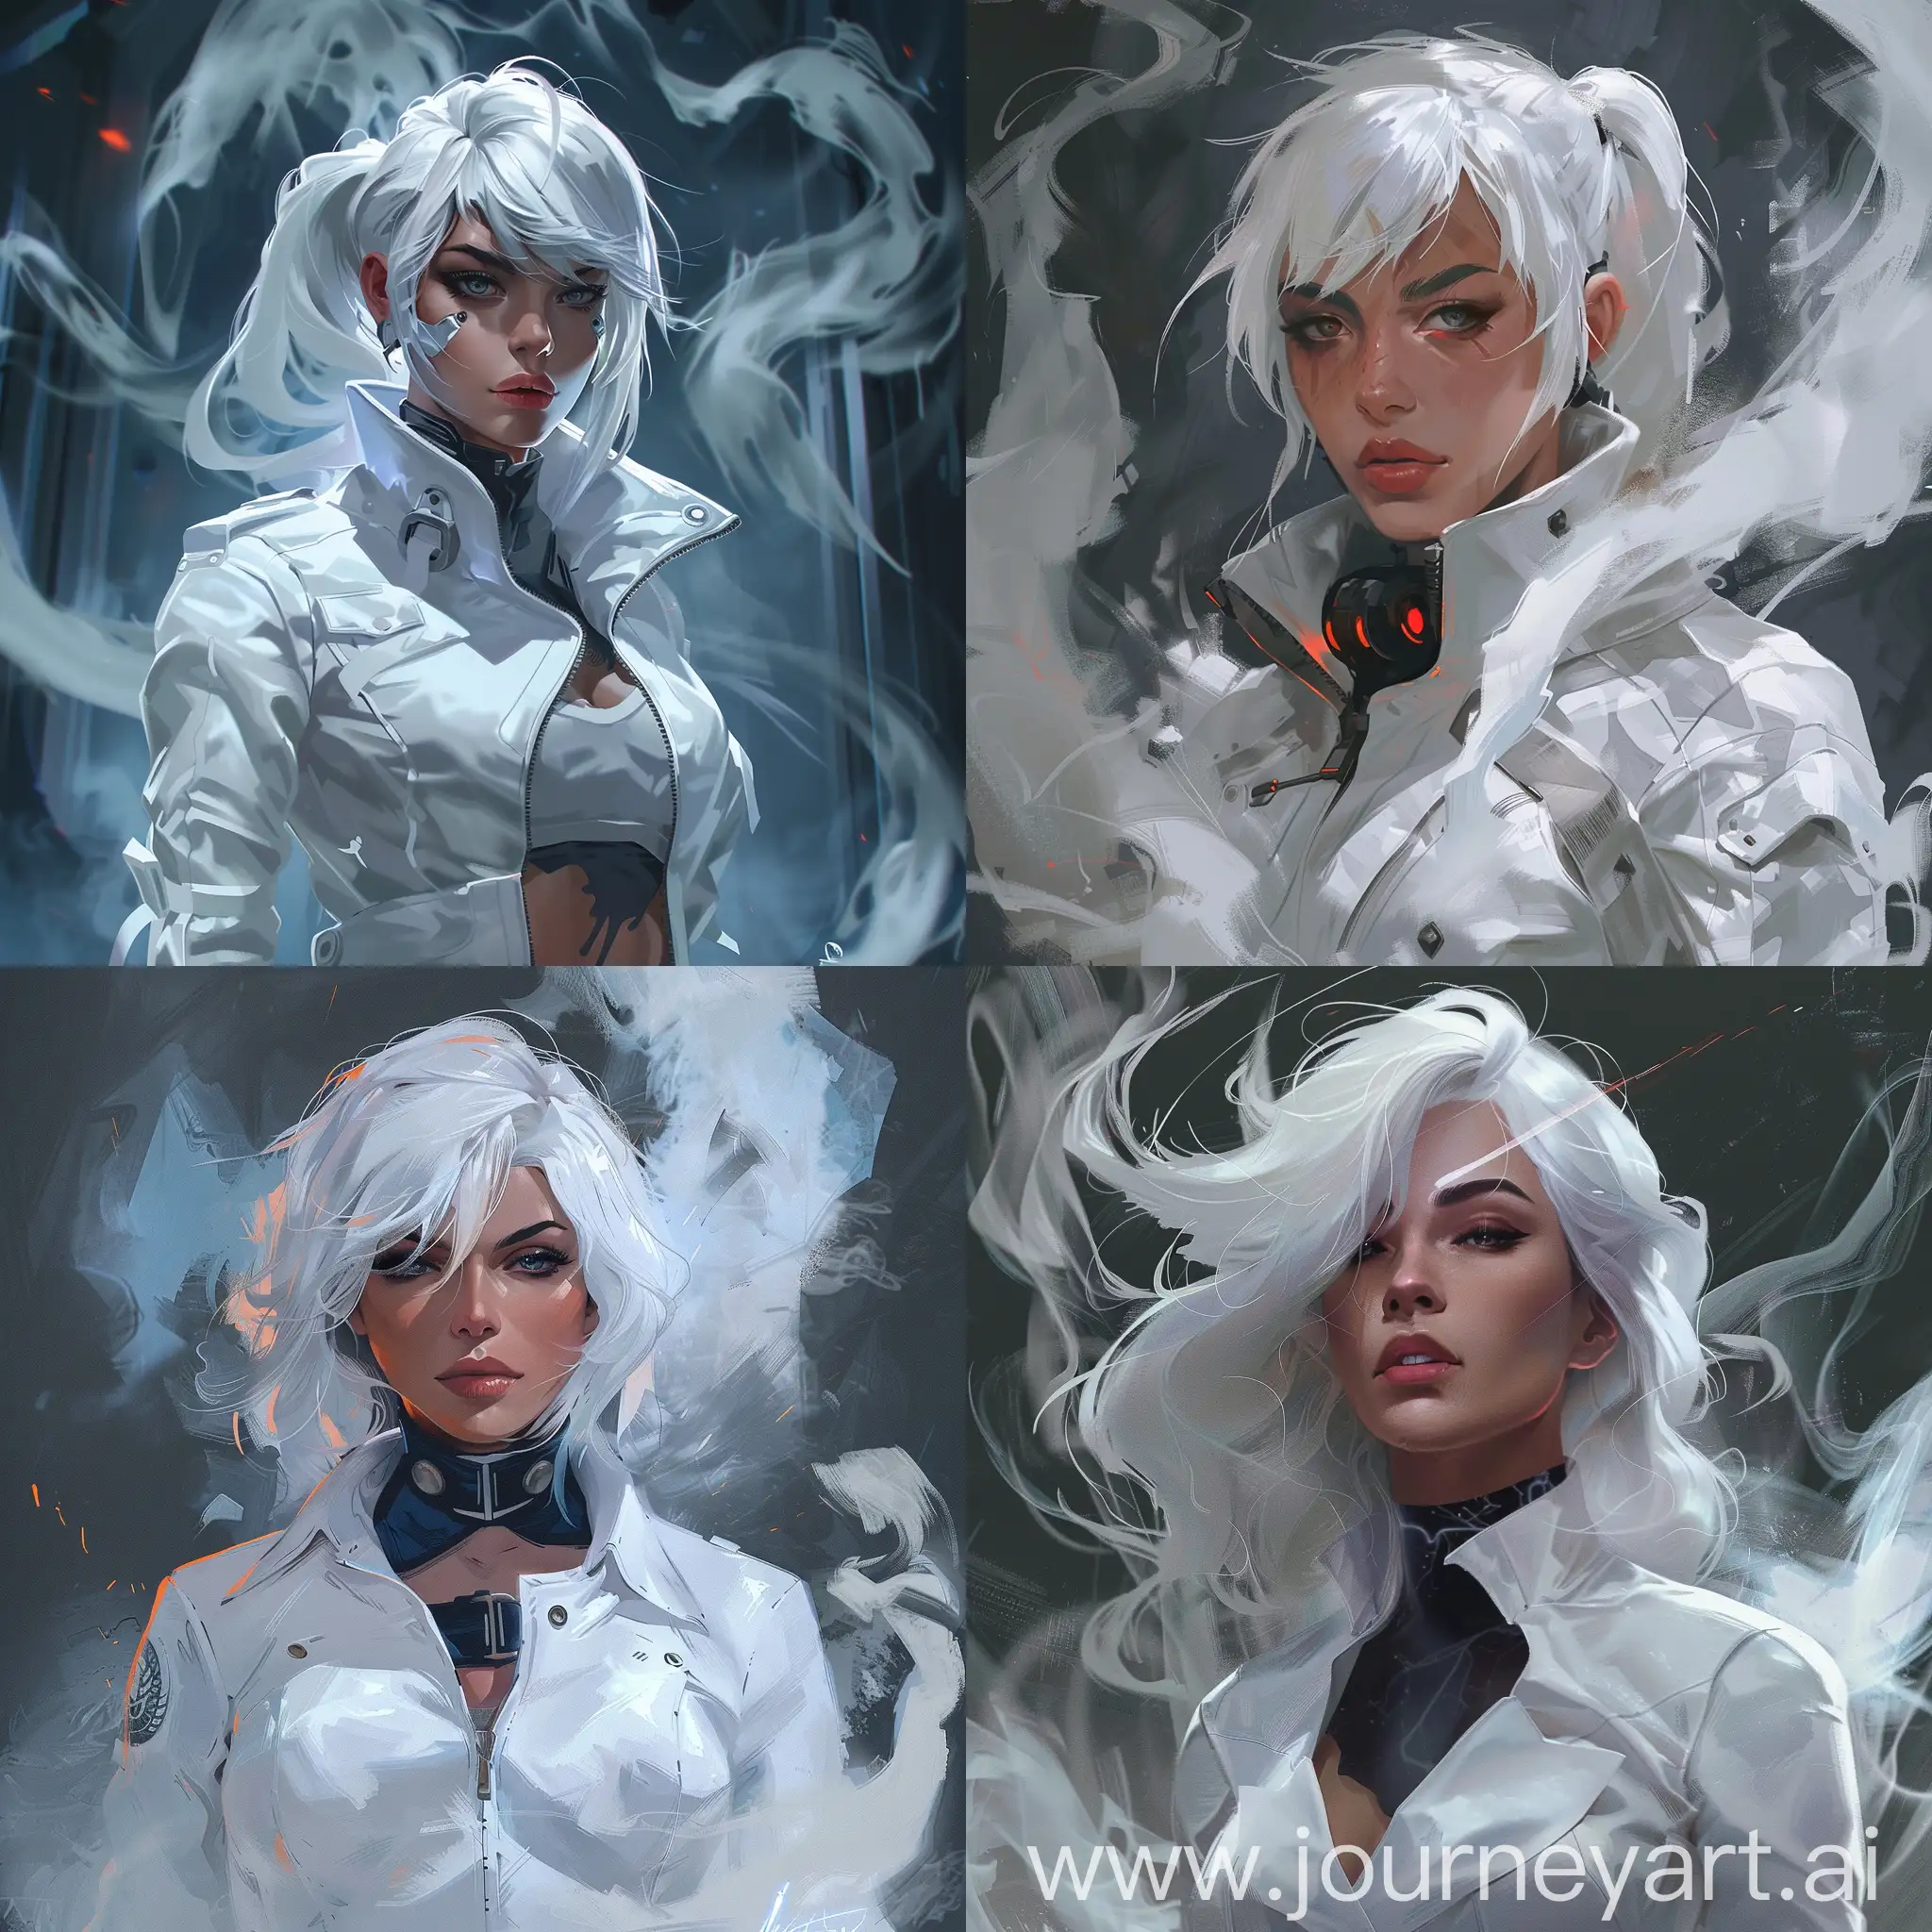 An Agent in the Valorant art style, a woman with white hair with grey bangs, white clothes and a smoke power effect around her